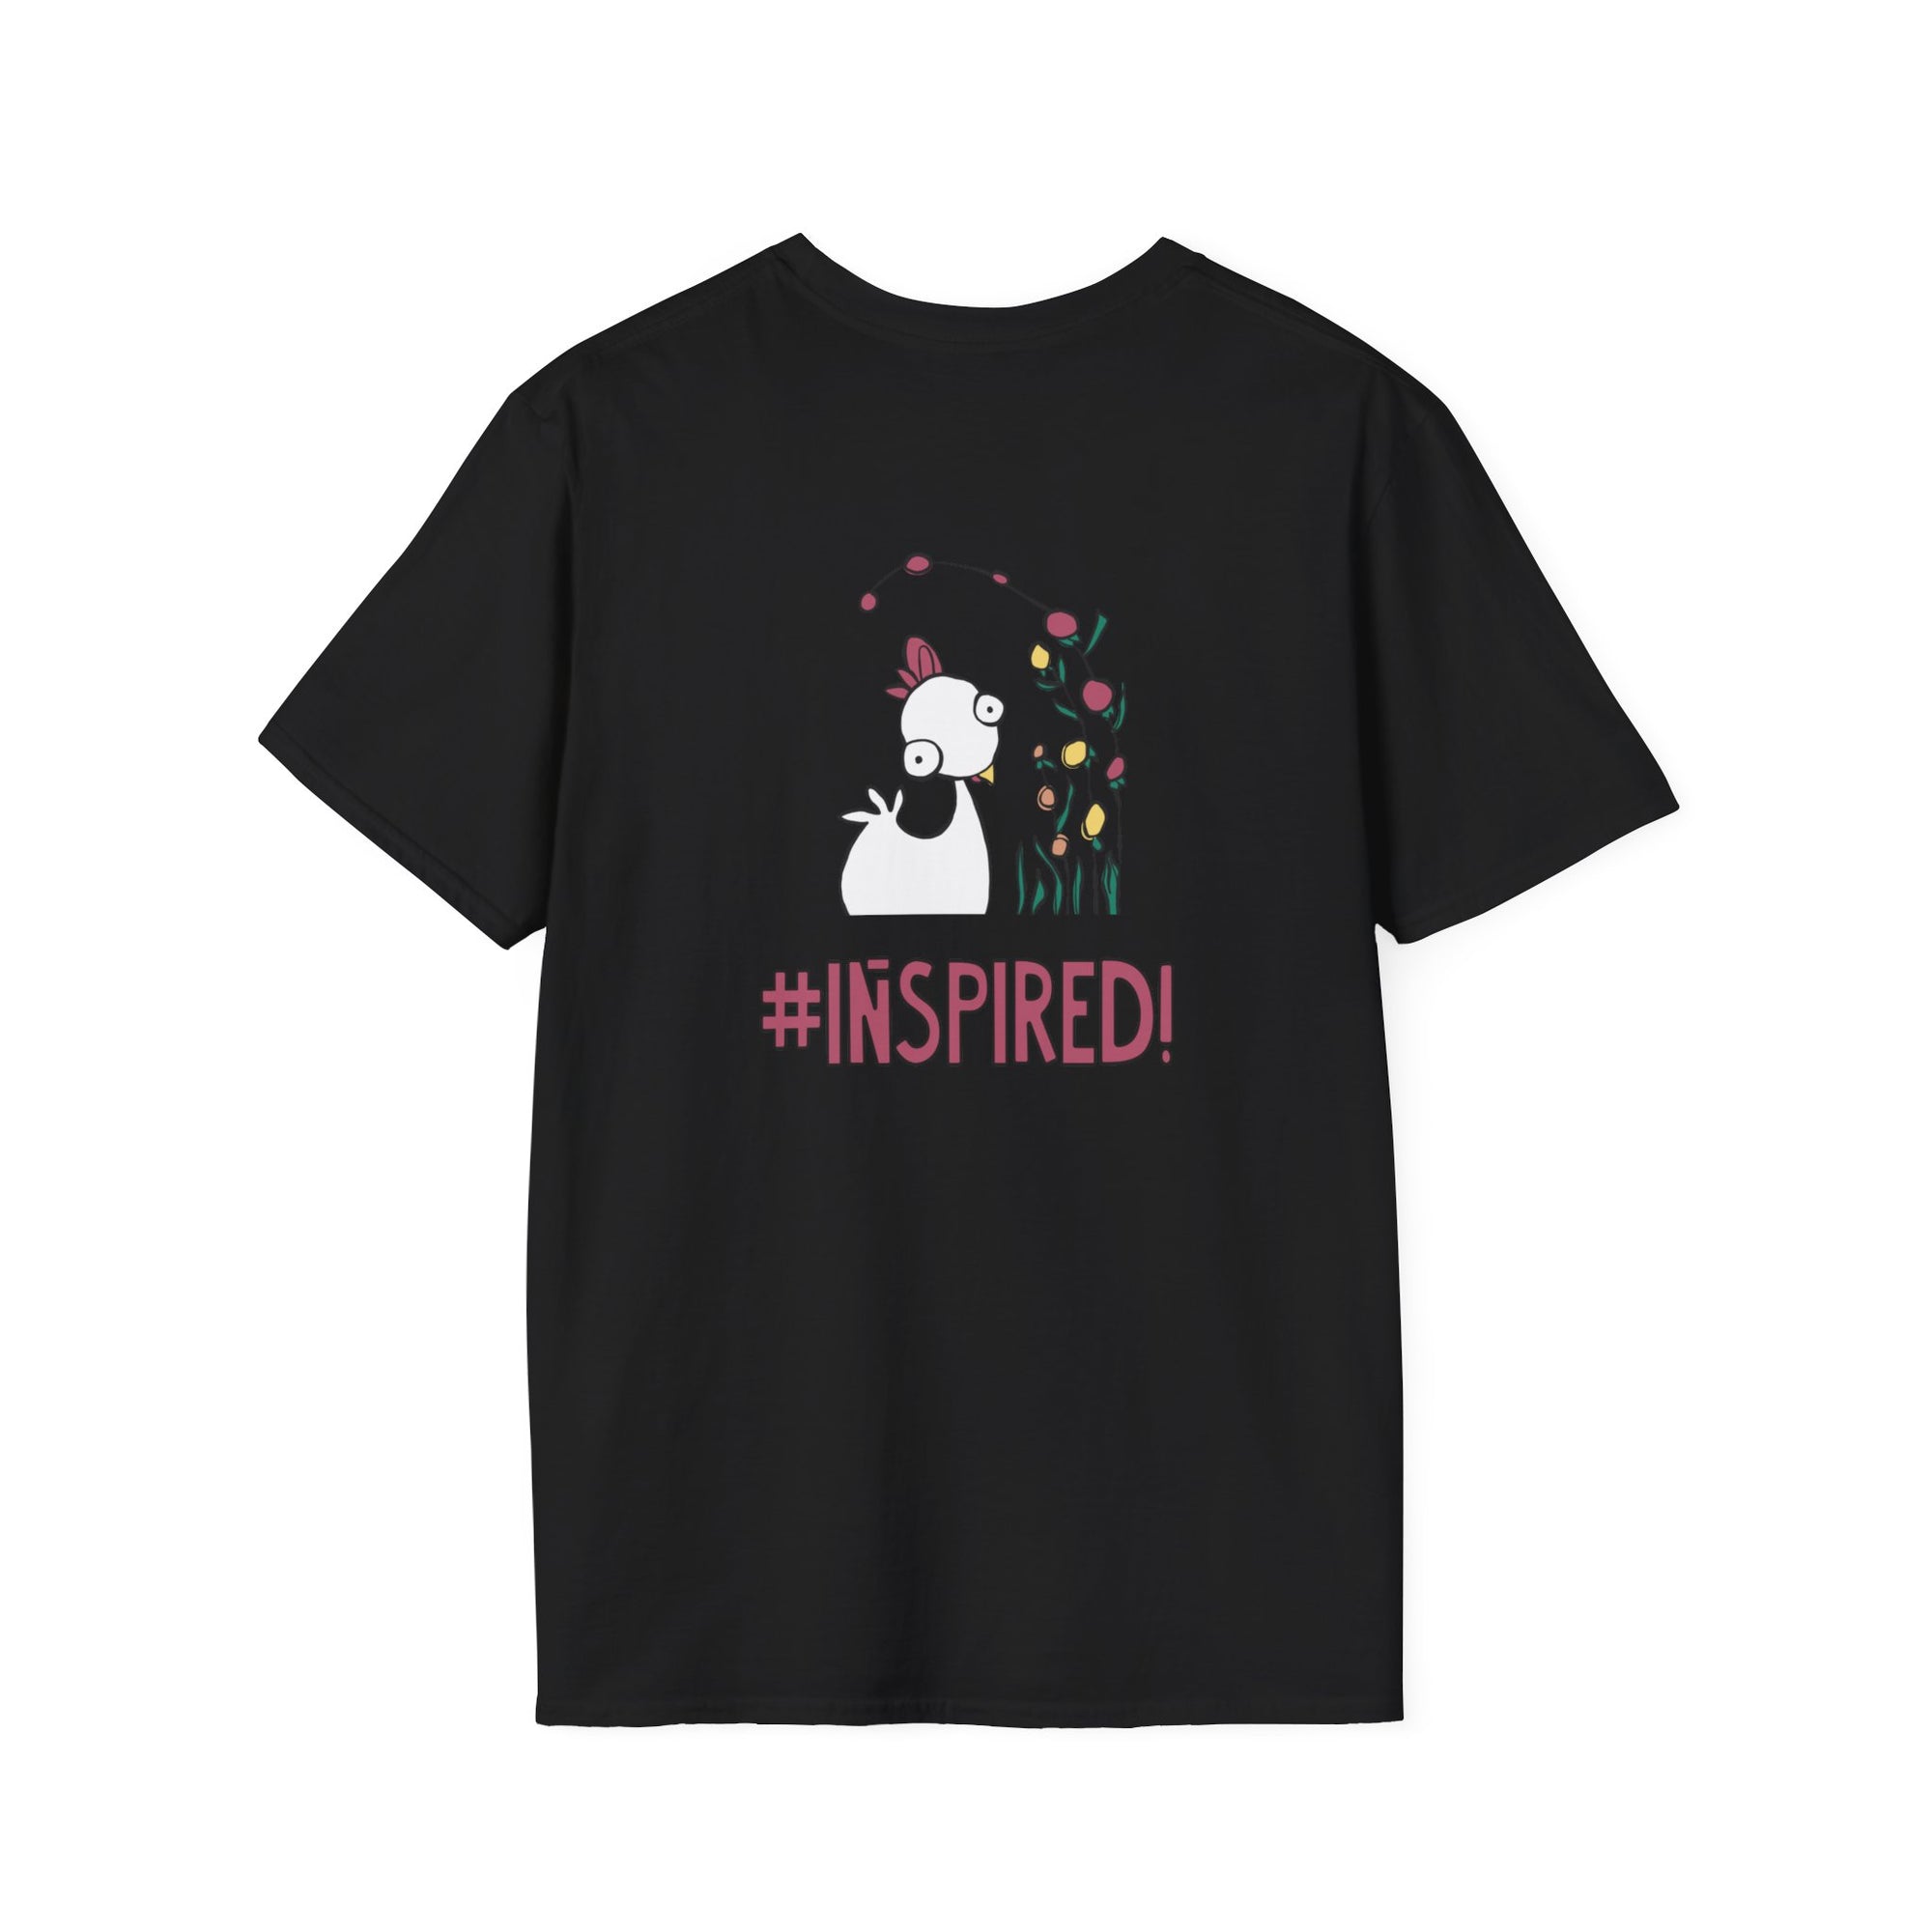 Inspired! by Inspire Farms